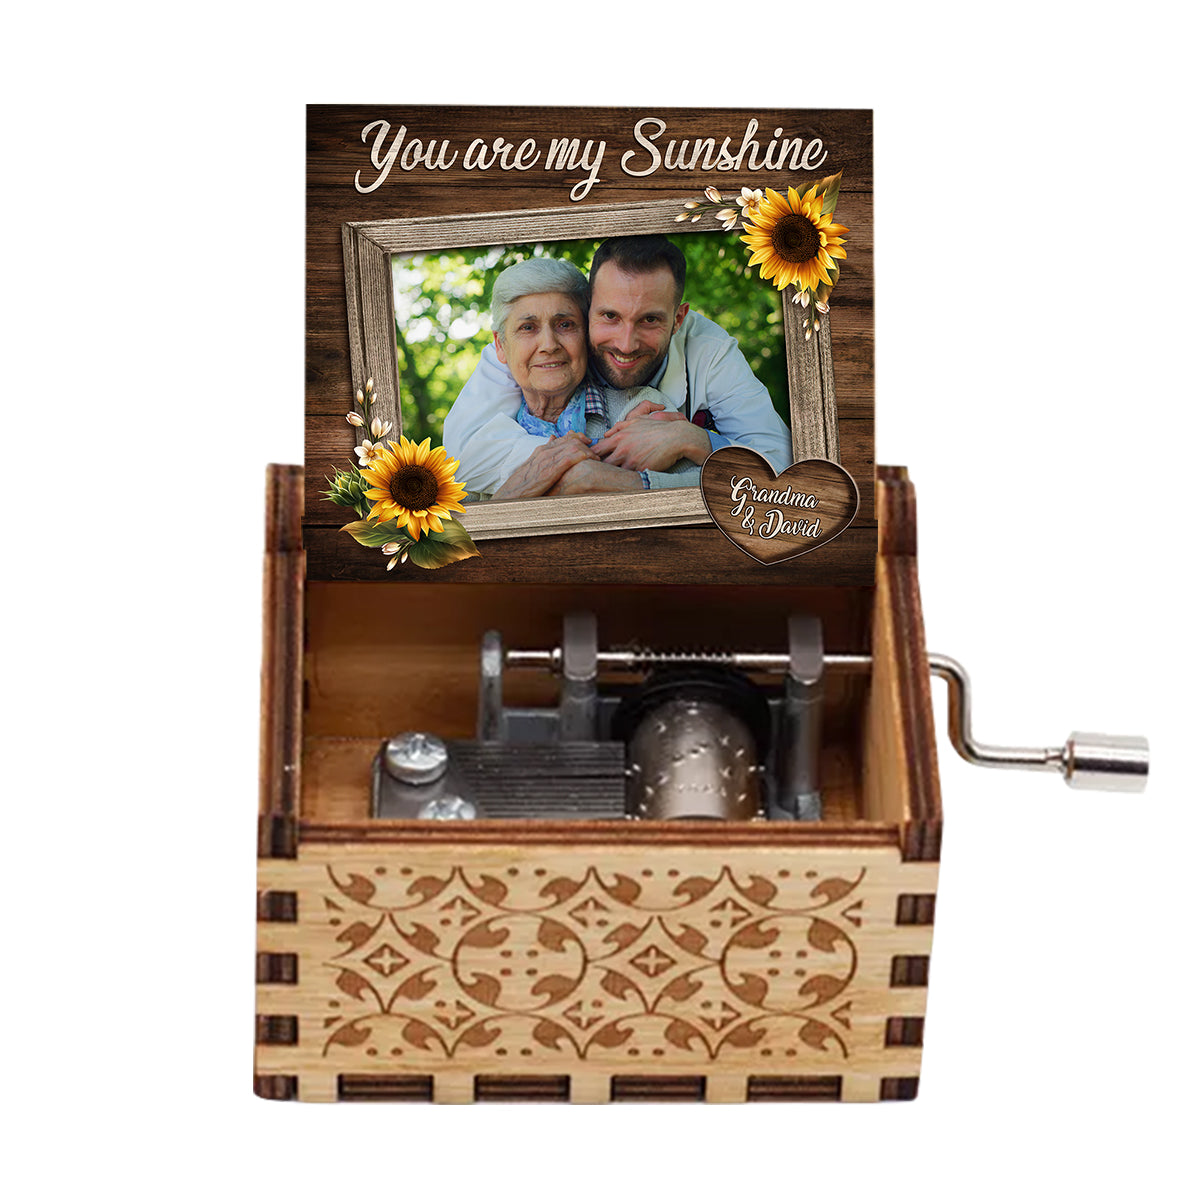 You Are My Sunshine - Gift for mom, grandma, grandpa, daughter, son, granddaughter, grandson, friend, sister, brother, aunt, uncle, dad - Personalized Hand Crank Music Box